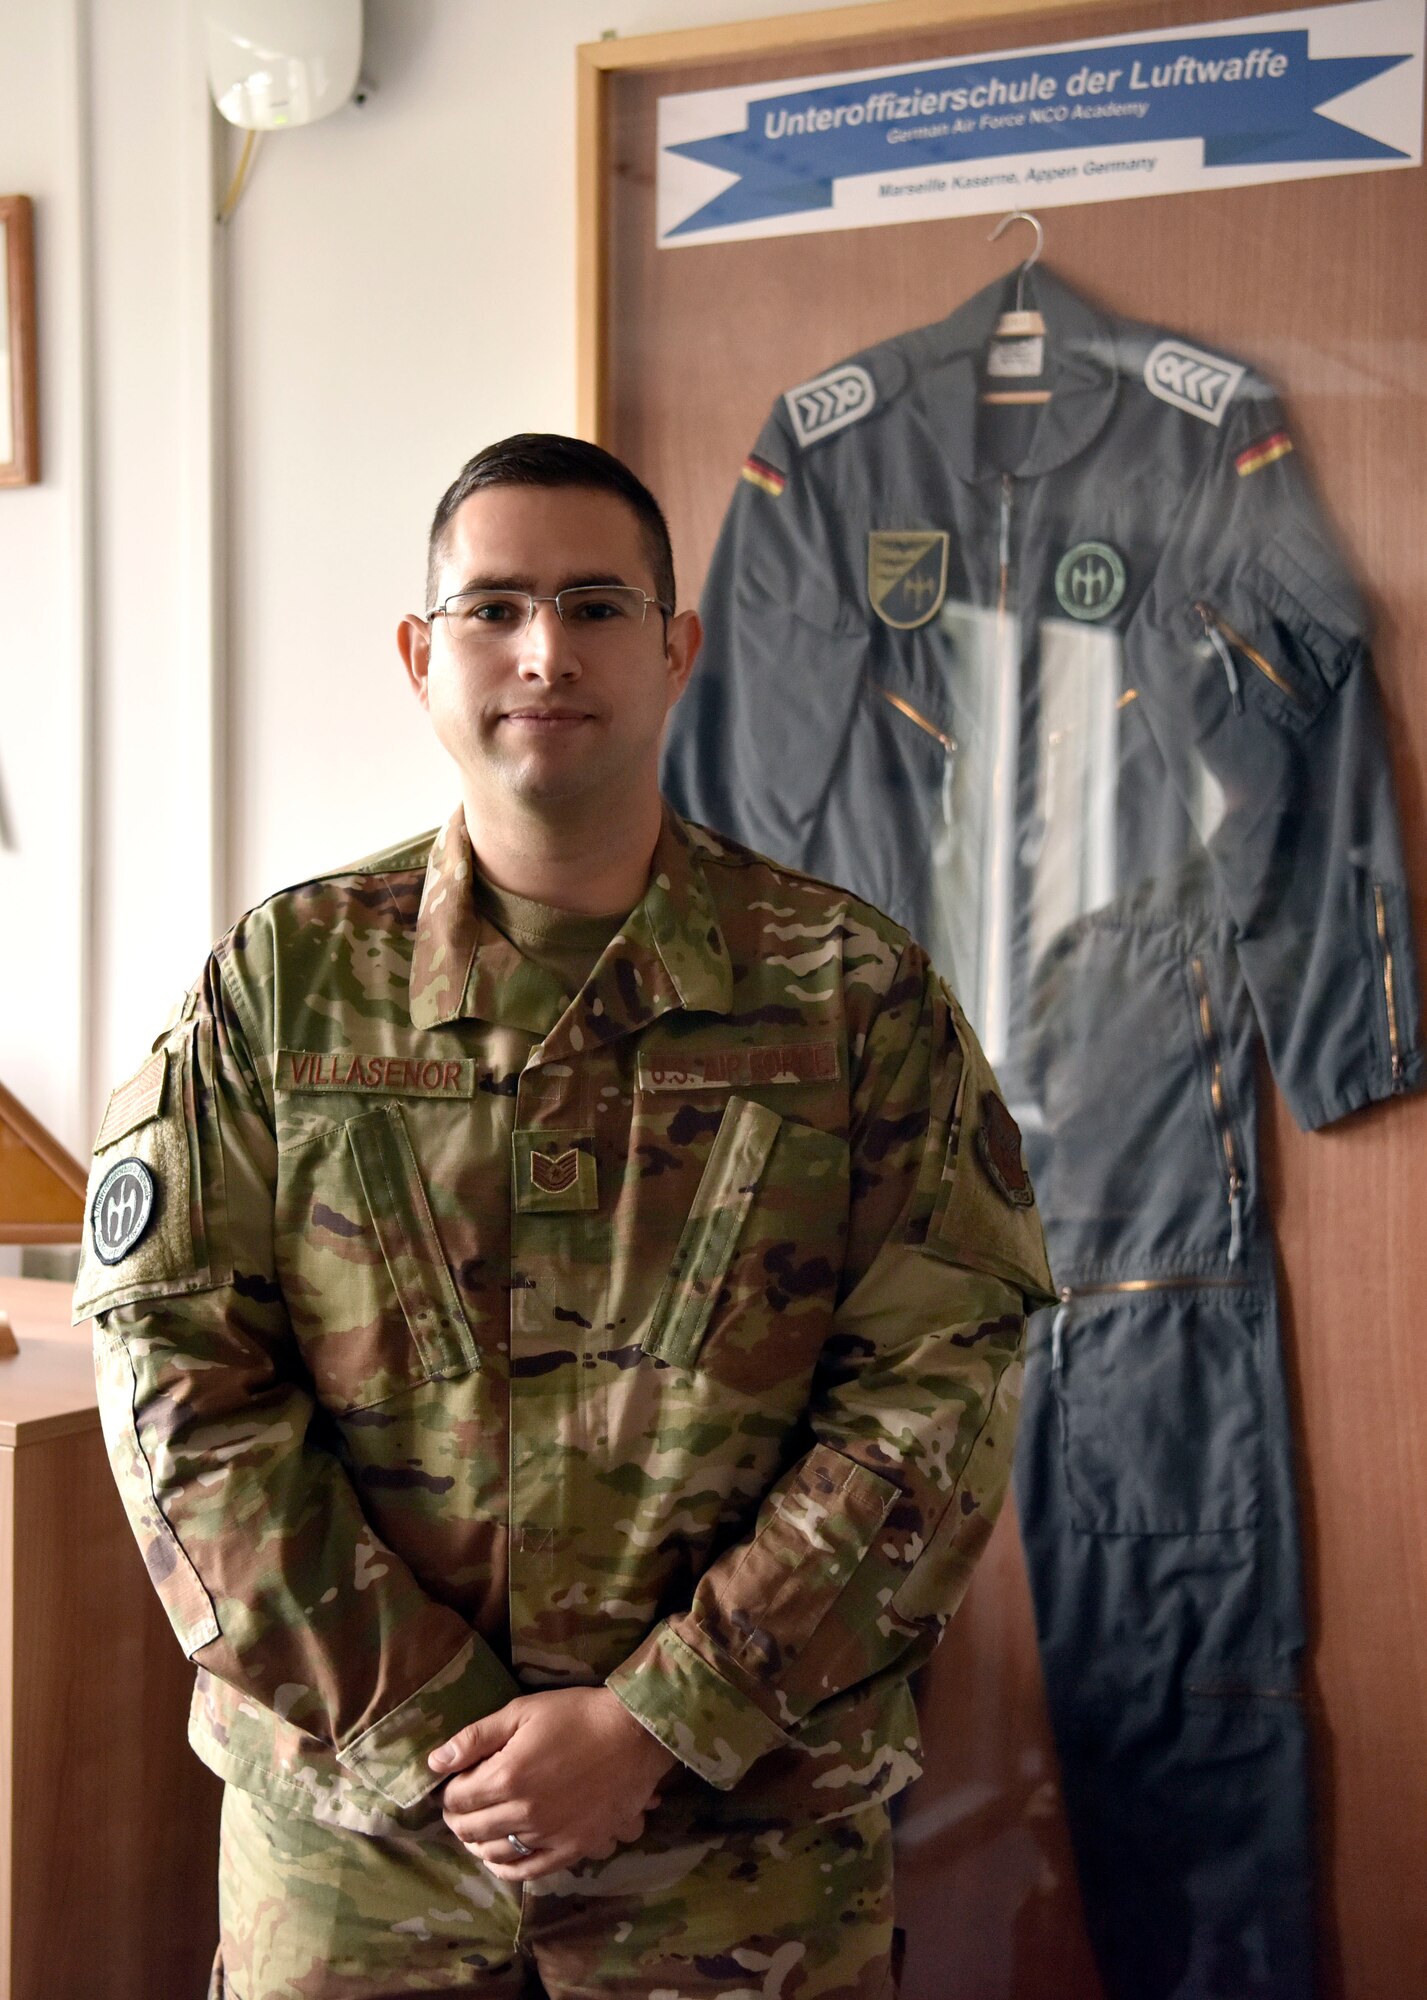 Tech. Sgt. Emmanuel Villasenor, German NCO Academy instructor, stationed at Marseille Kaserne, Appen, Germany, is one of only three enlisted members in Europe serving under the U.S. Air Force Military Personnel Exchange Program. (U.S. Air Force photo by Tech. Sgt. Lindsey Maurice)